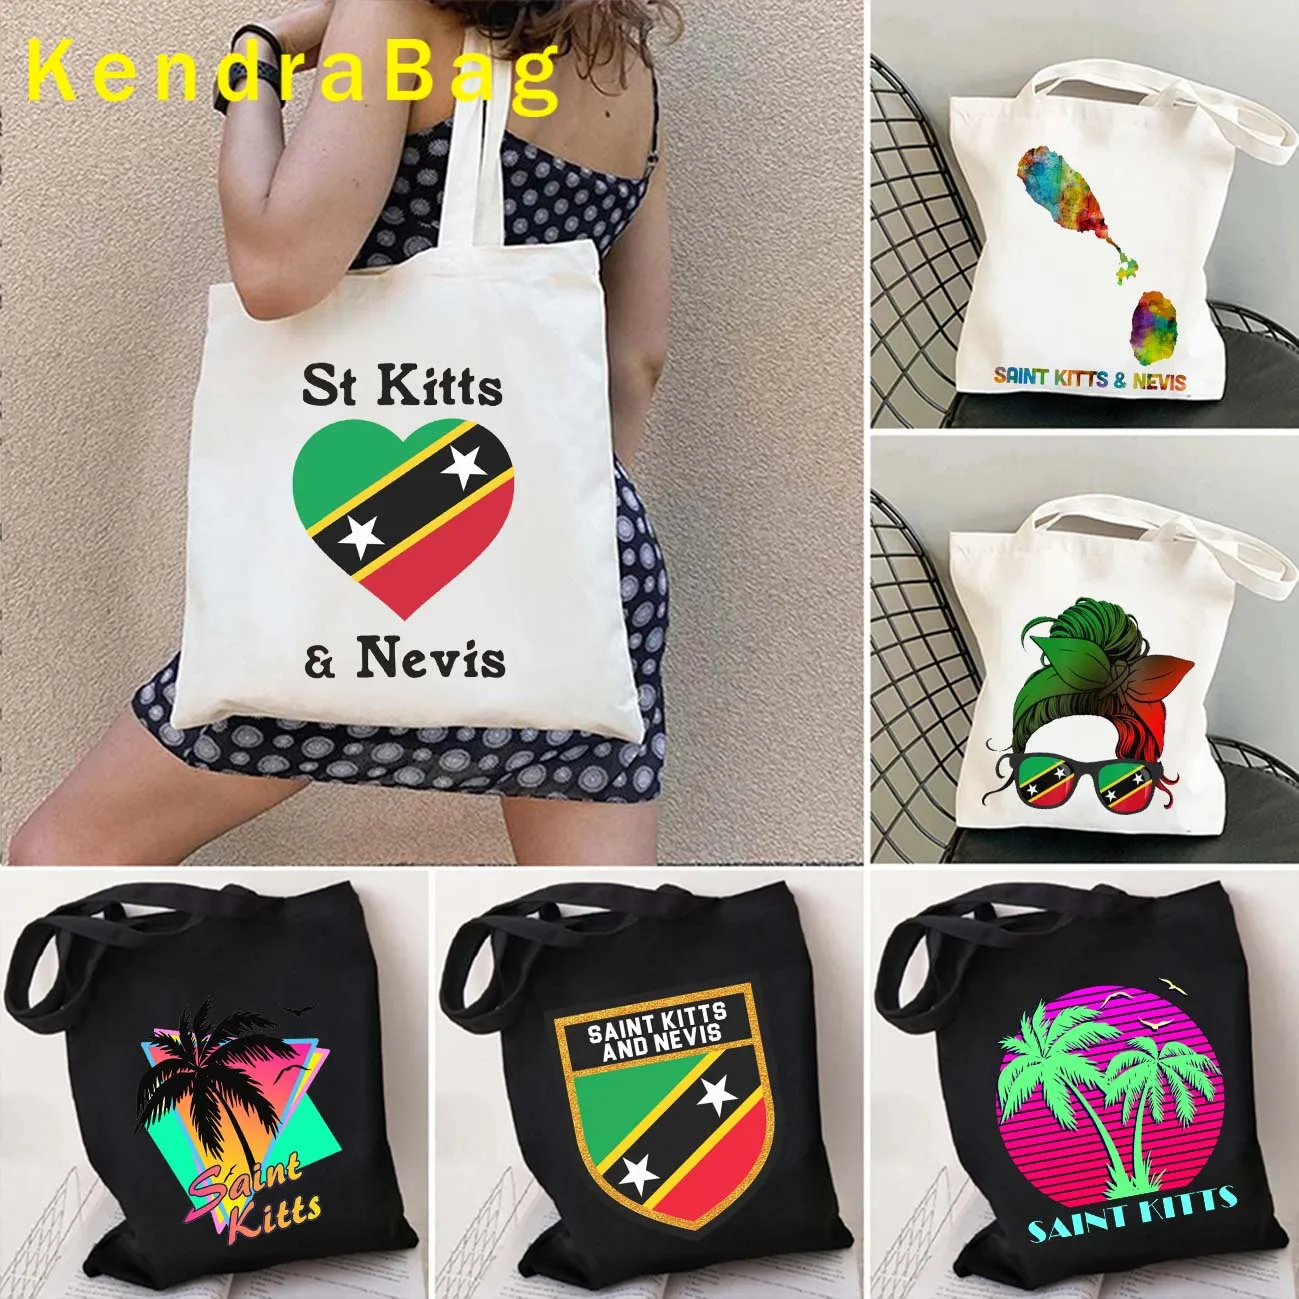 

Saint Kitts and Nevis Flag Map Coat of Arms Round Emblem Love Heart Travel Gifts Women Canvas Shoulder Tote Bag Shopper Handbags